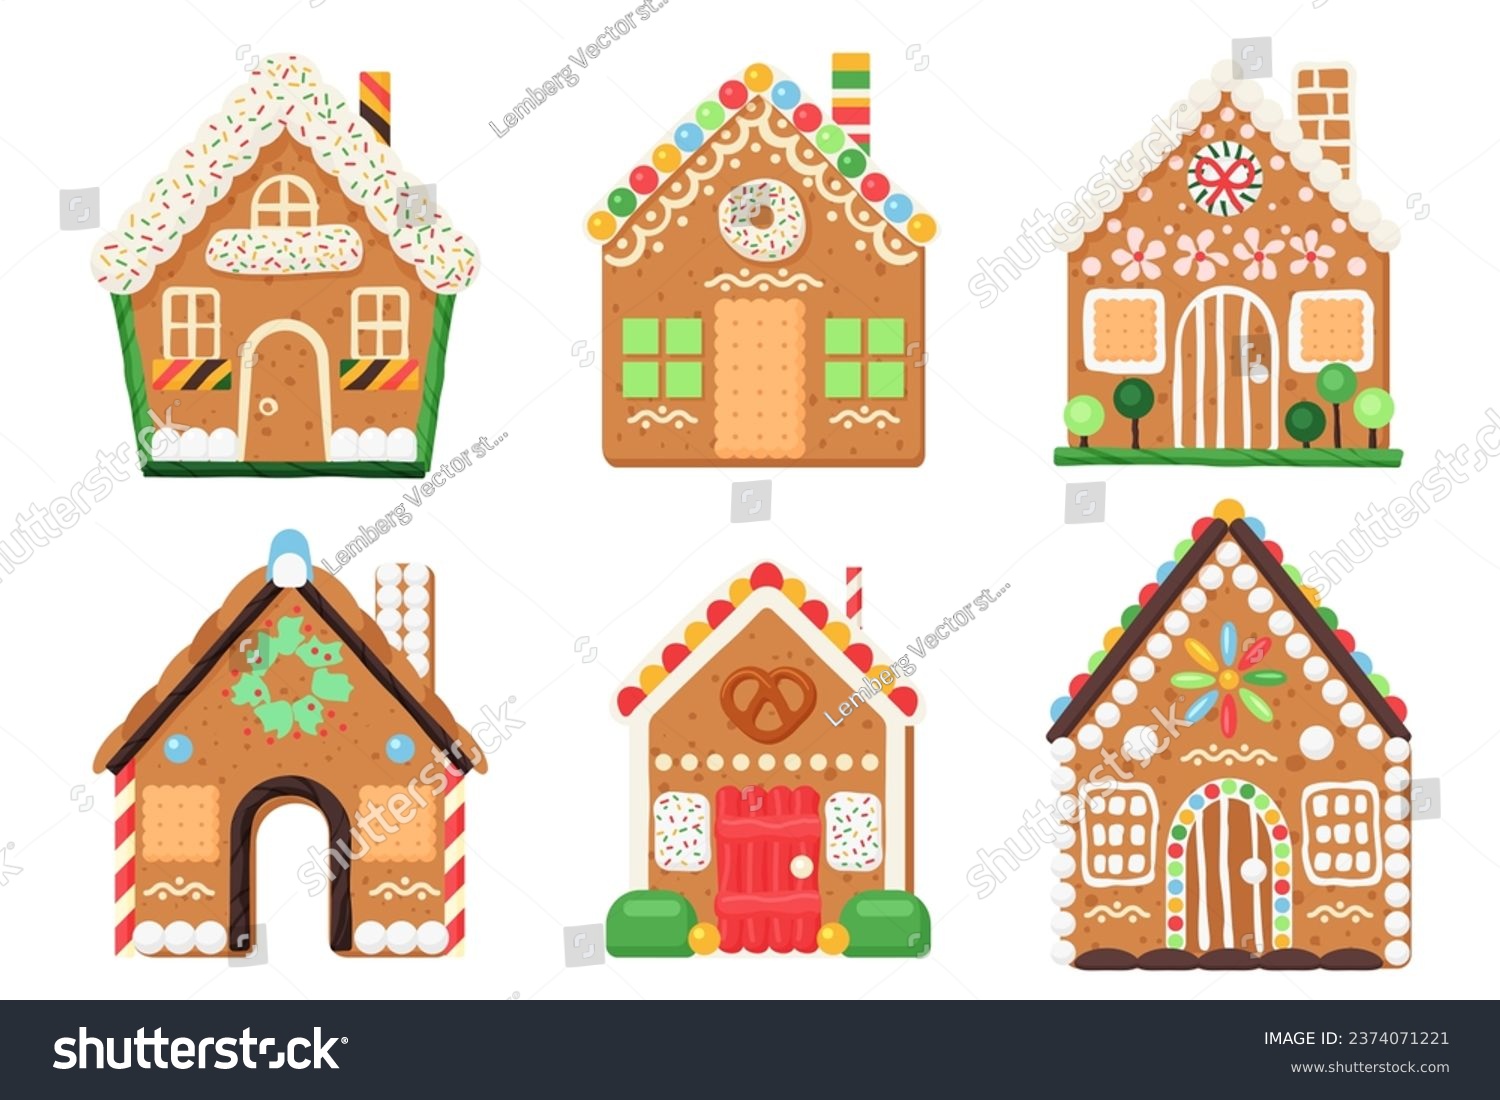 SVG of Vector illustration of gingerbread houses. Cartoon baked town buildings with candy, sugar icing snowflakes, and chocolate decorations on windows and doors. svg